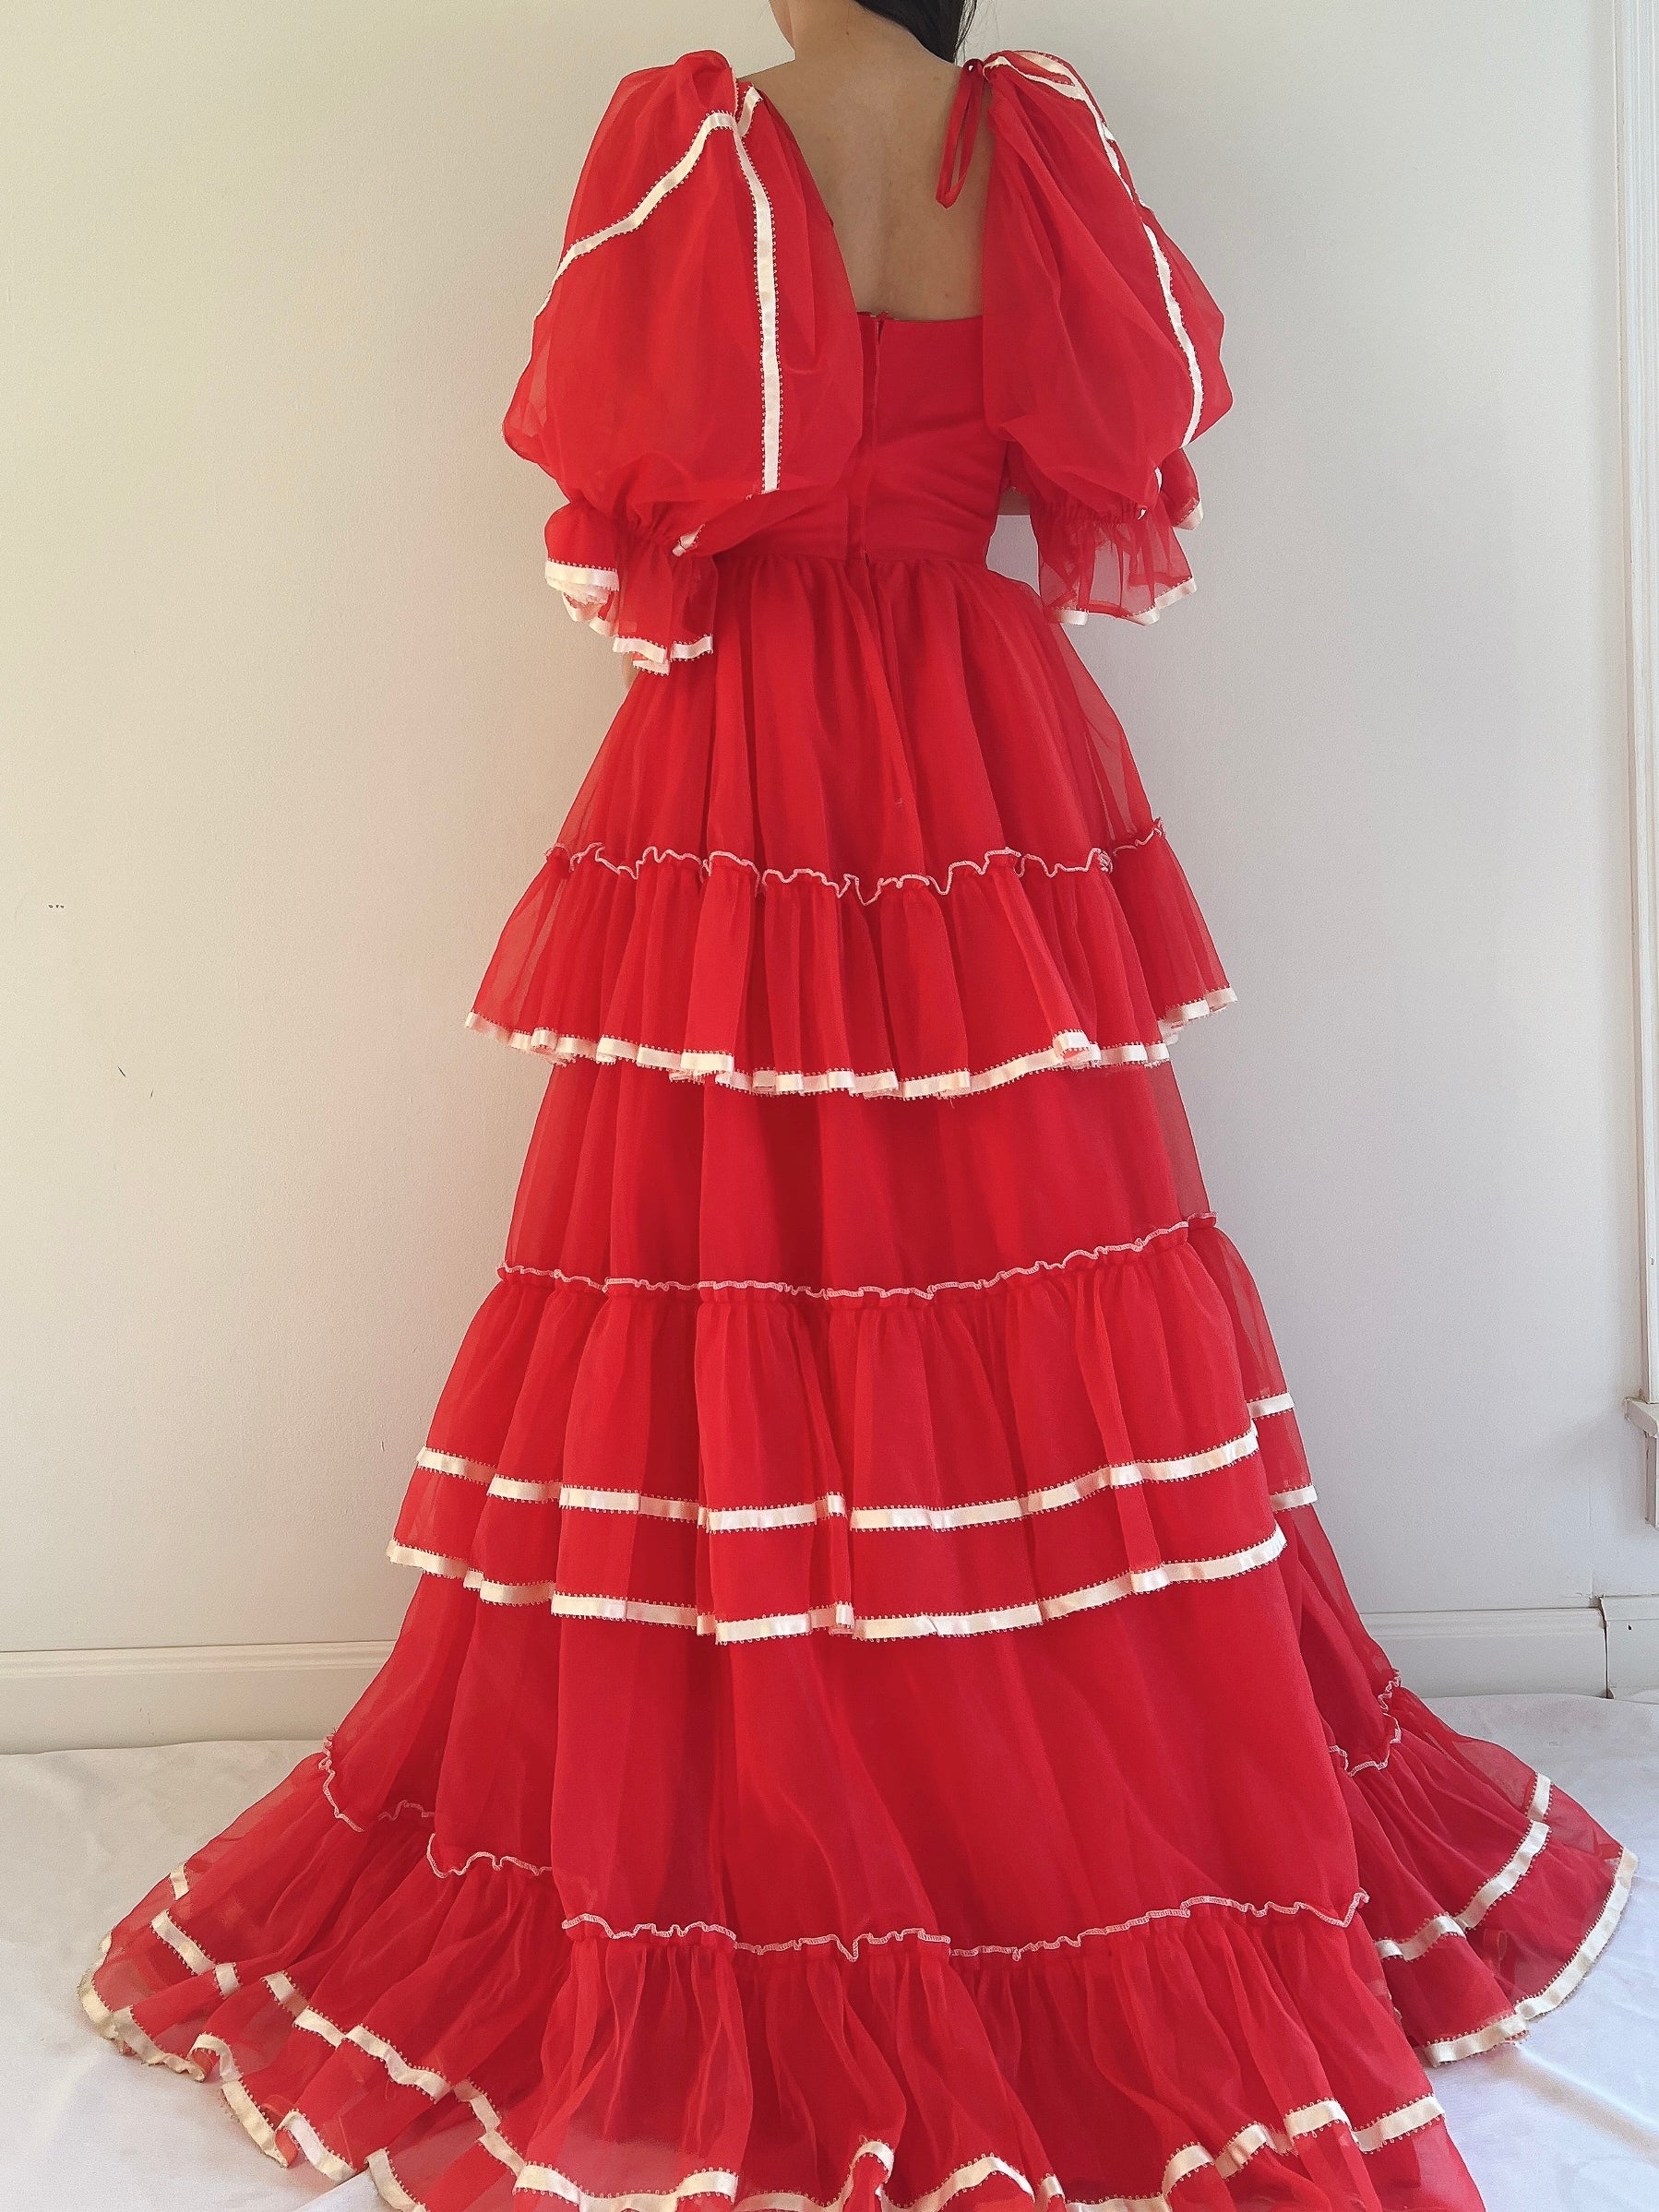 Vintage Nylon Chiffon Tiered Gown - XS/S